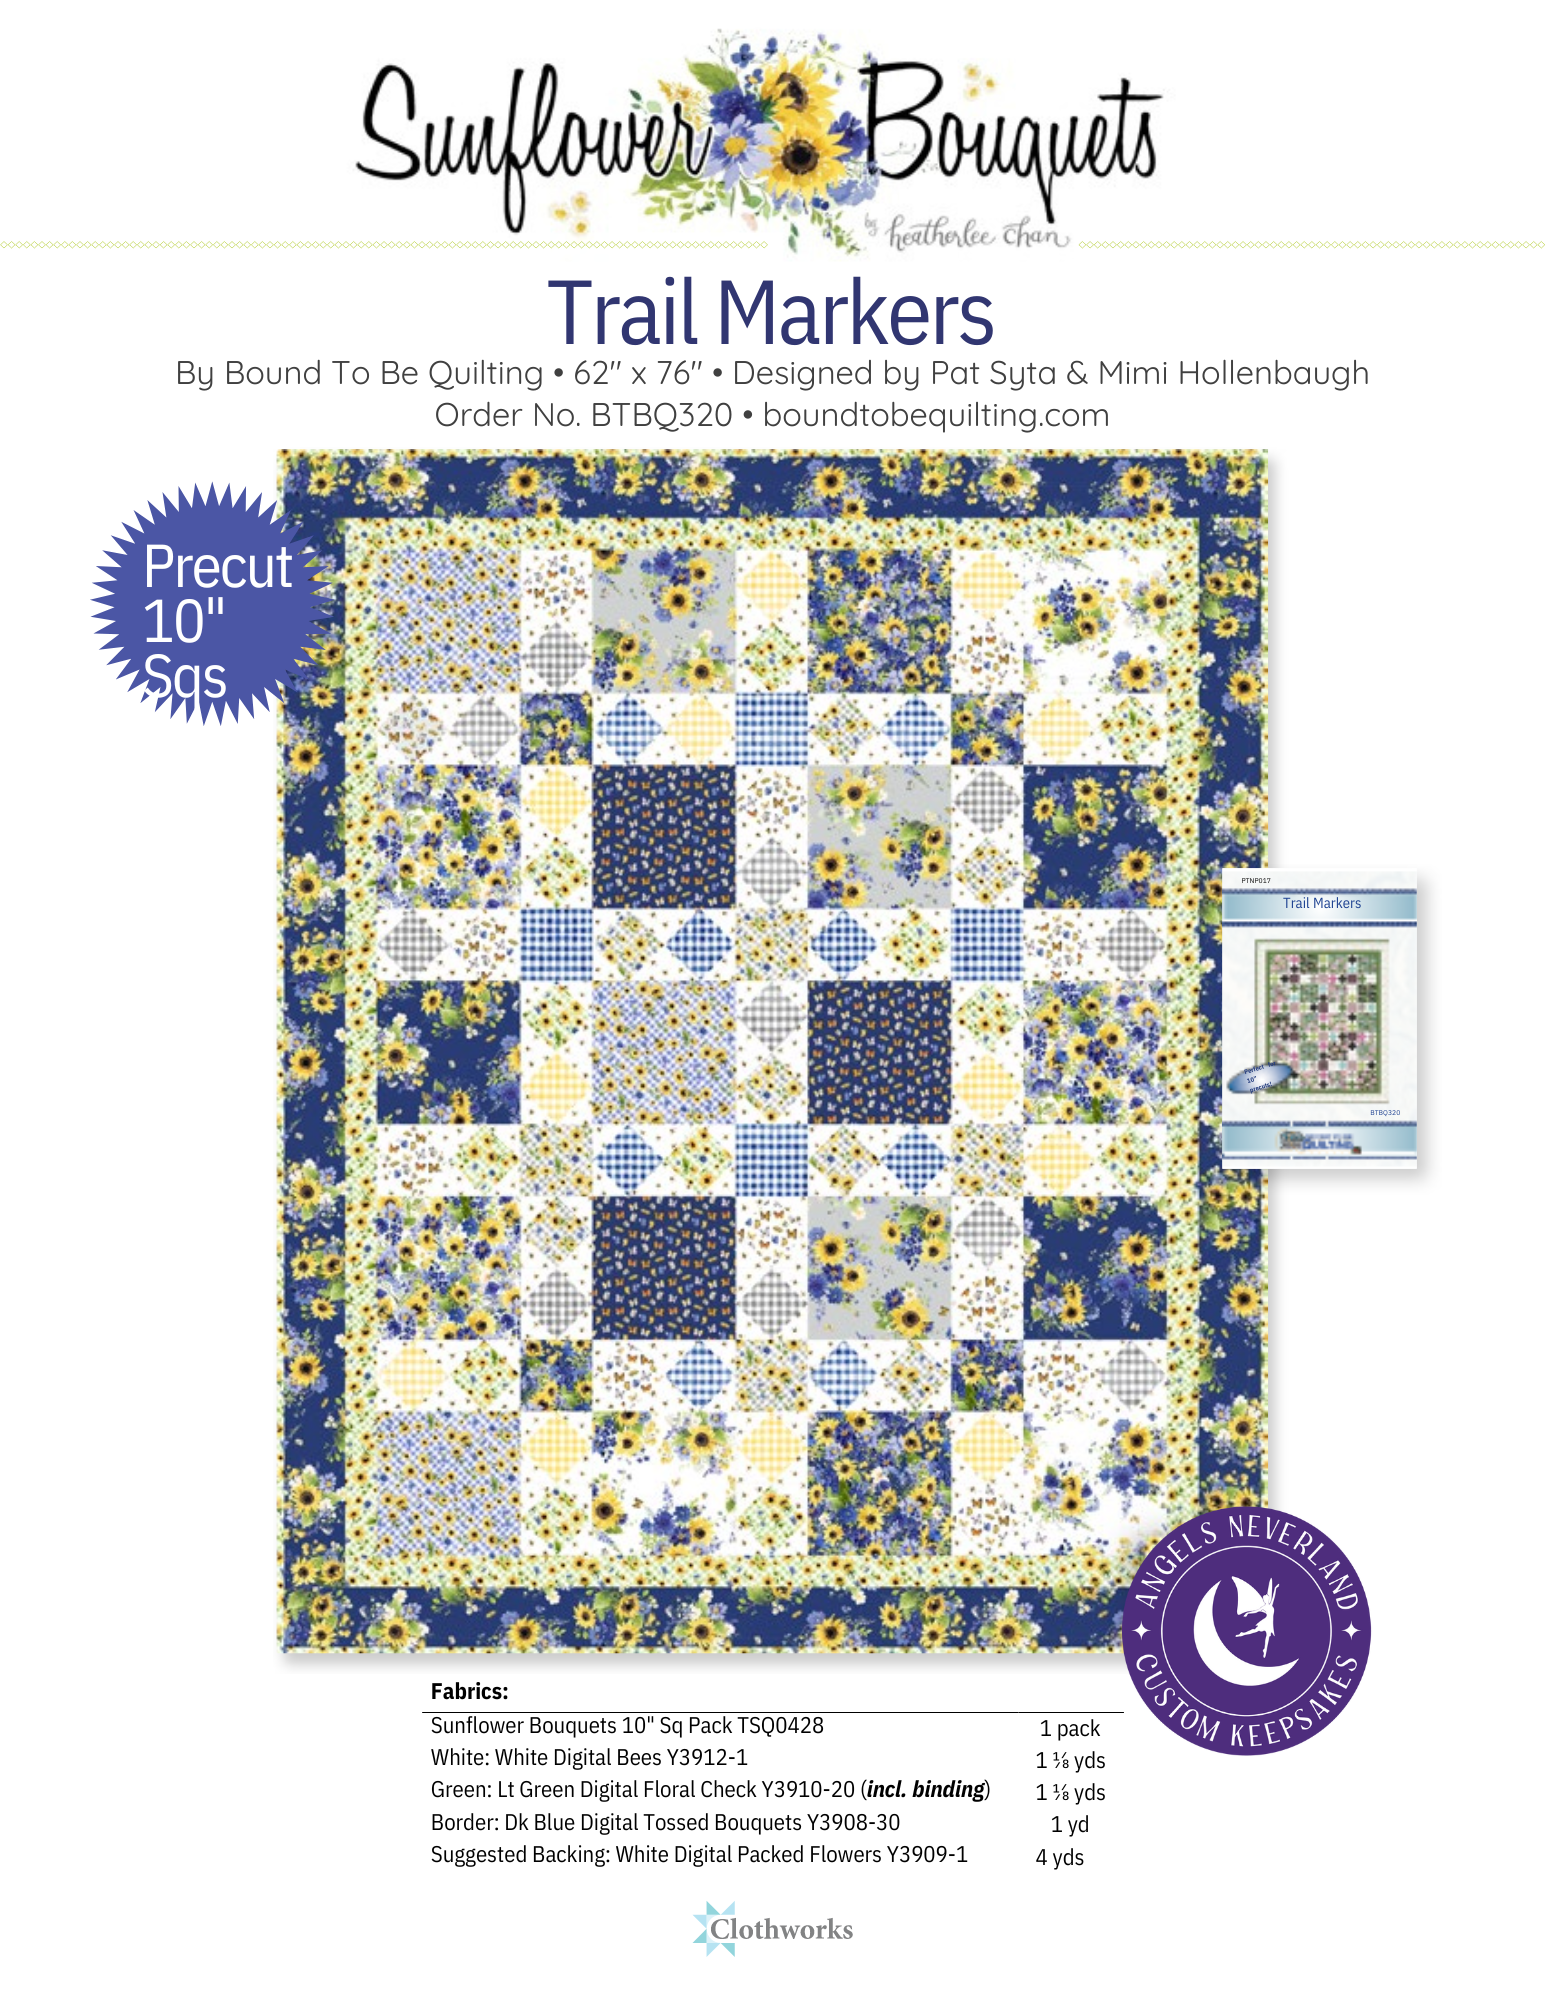 Clothworks Quilt Kit Quilt Kit Only (Top/Binding/Pattern) Sunflower Bouquets Trail Markers QUILT KIT approximate finished size 62" x76"